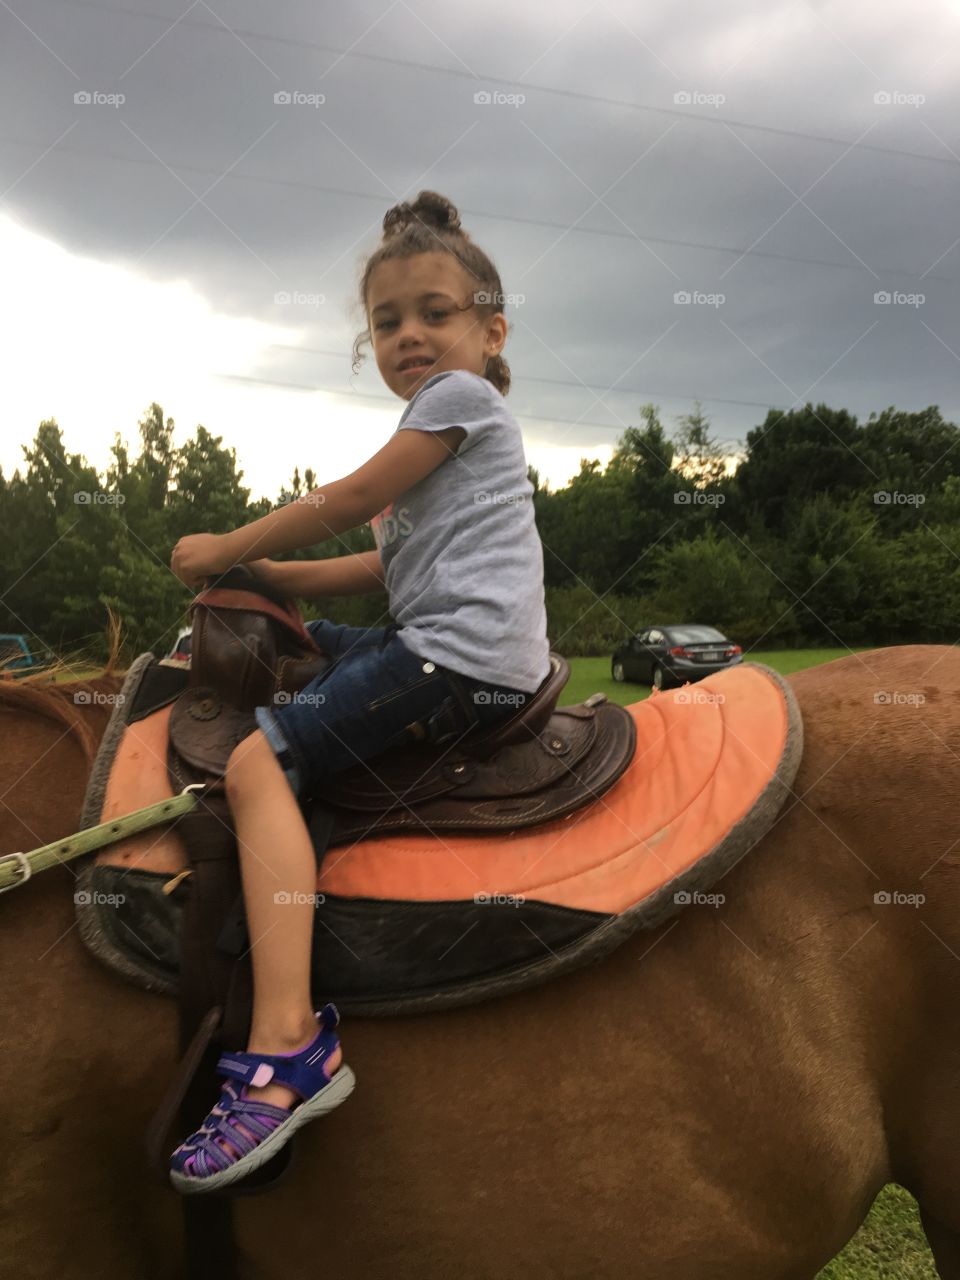 Young girl Horseback riding on a cool evening 